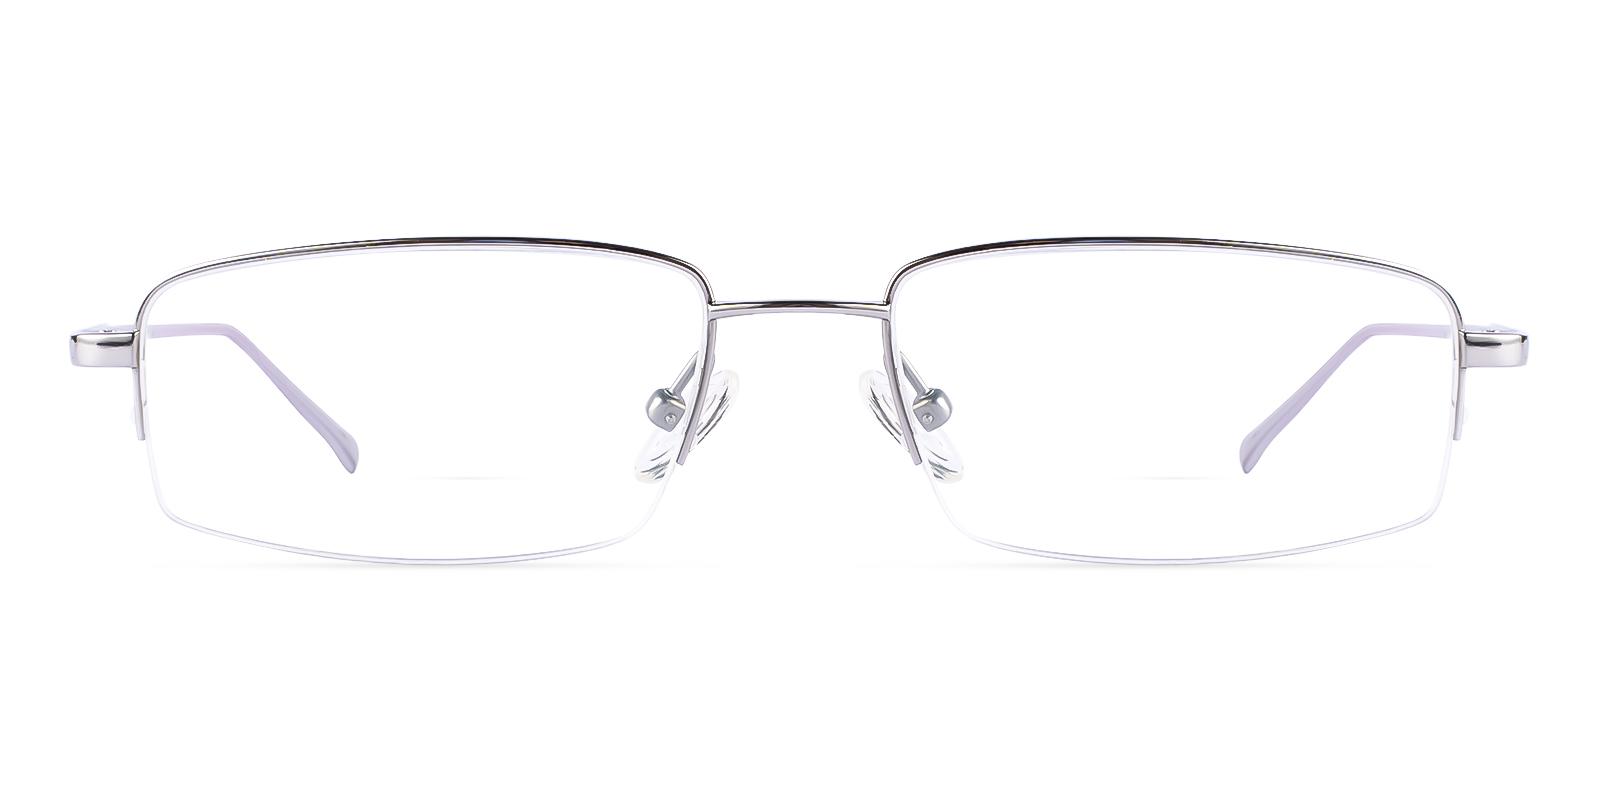 Spaceast Silver Titanium Eyeglasses , NosePads Frames from ABBE Glasses